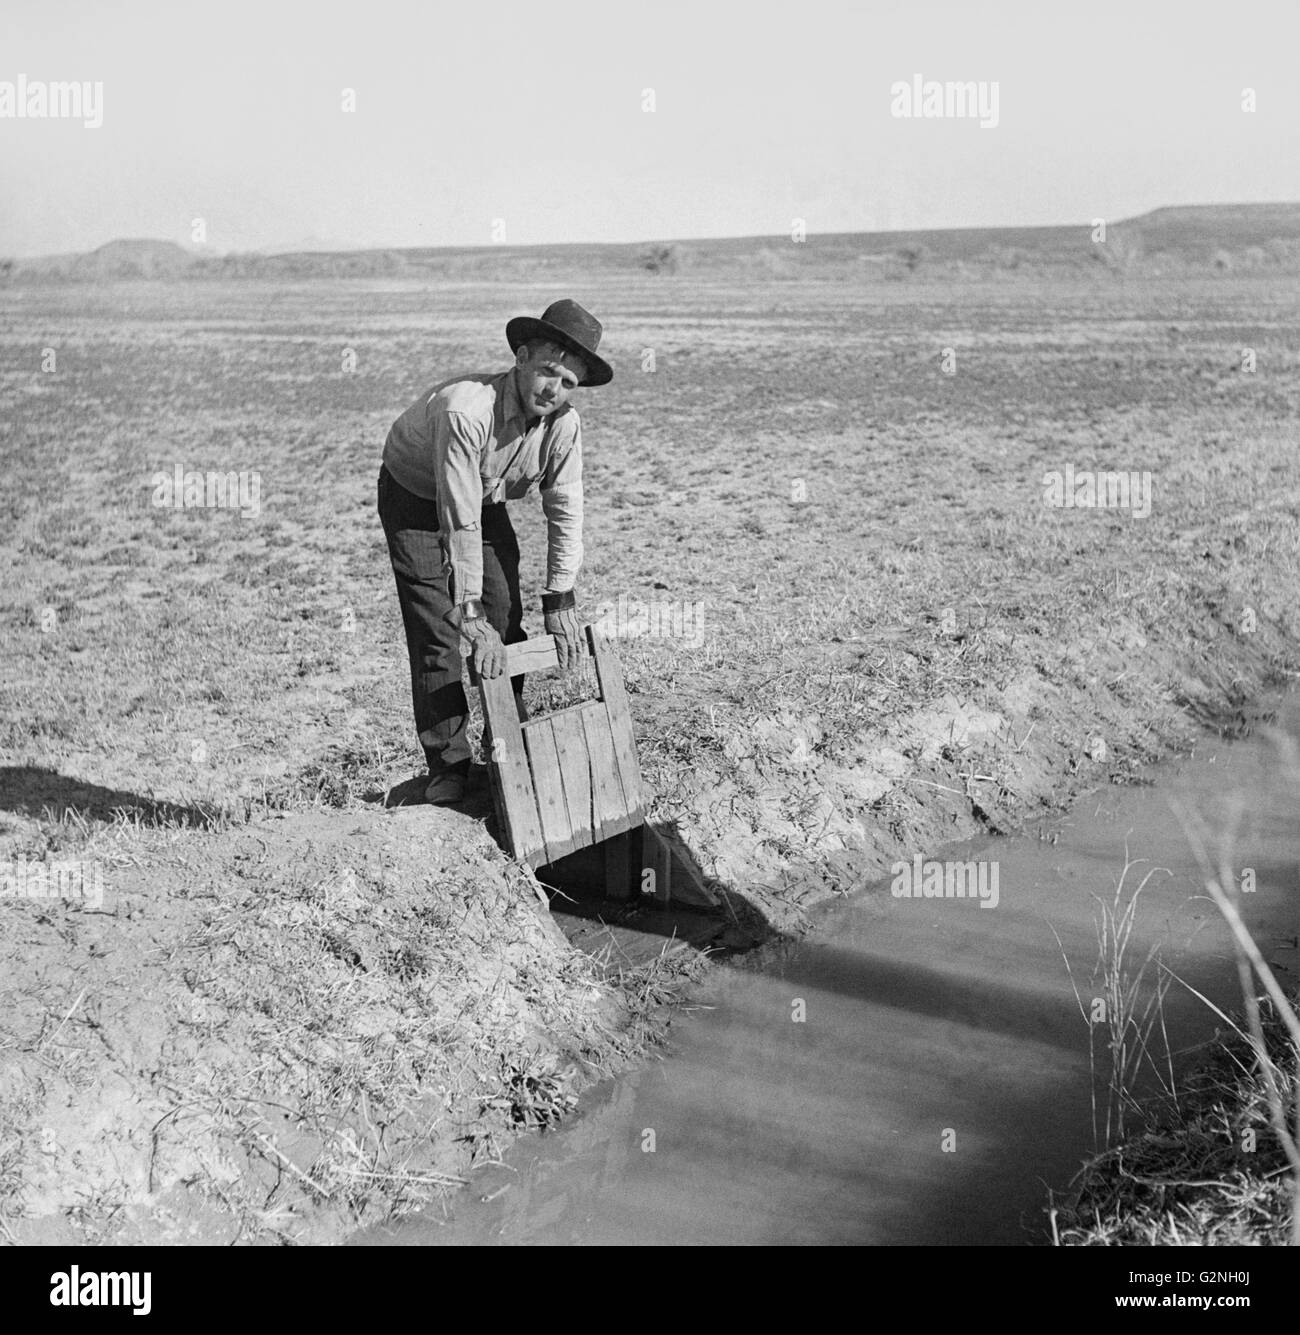 Farmer Opening Gate that Allows Water to Flow into Field from Irrigation Ditch, New Mexico, USA, Arthur Rothstein for Farm Security Administration (FSA), September 1936 Stock Photo